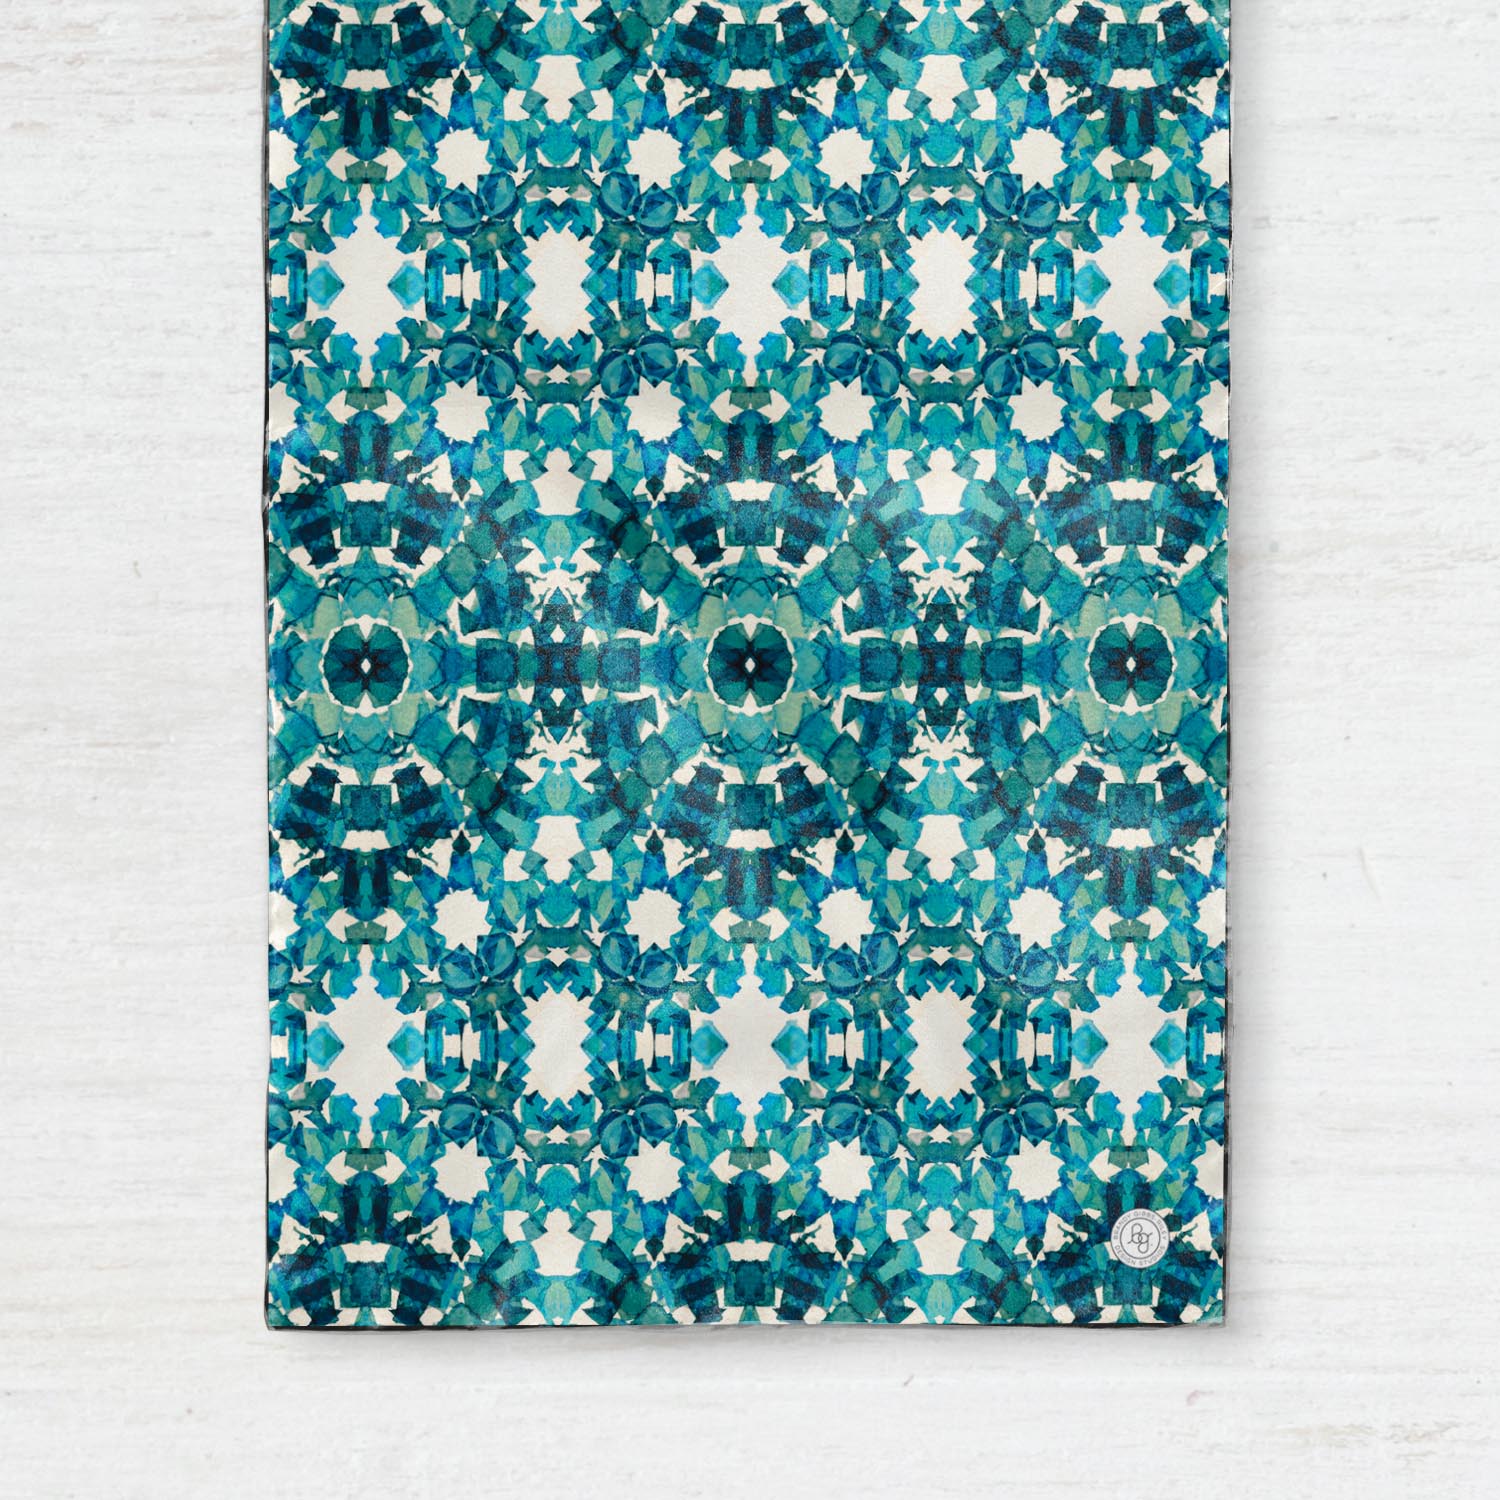 Detail of a silk scarf, featuring an abstract teal pattern